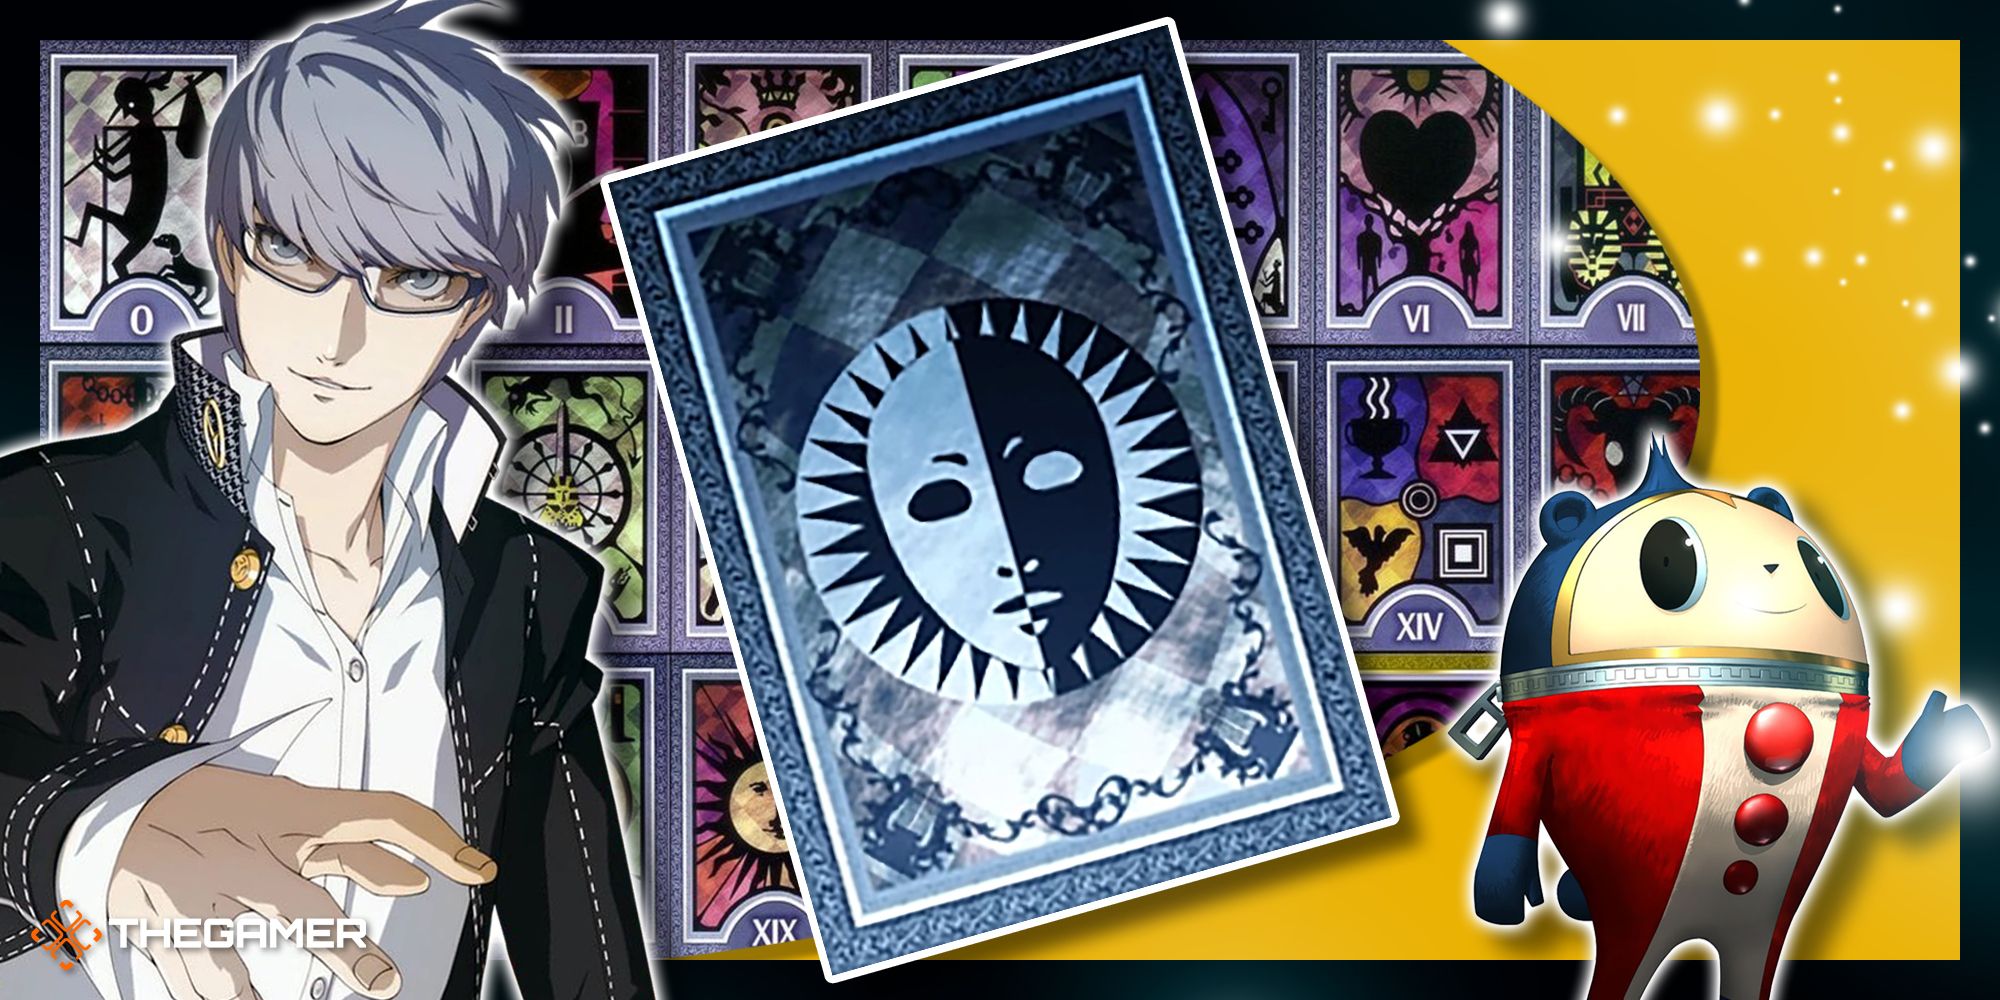 When And Where To Find Every Social Link Character In Persona 4 Golden